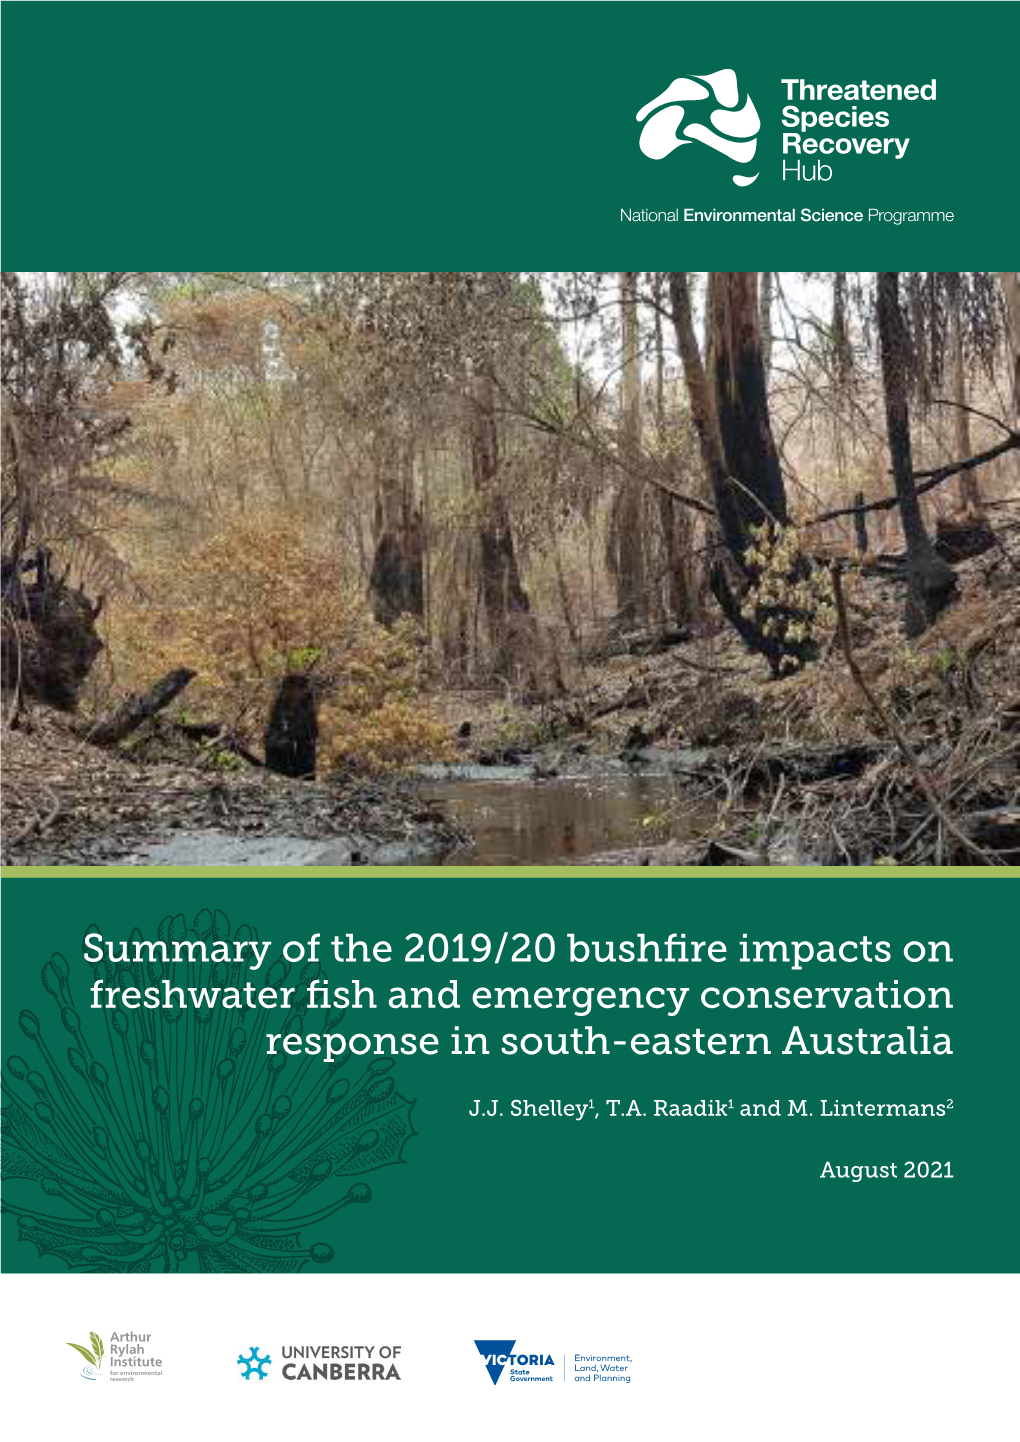 Summary of the 2019/20 Bushfire Impacts on Freshwater Fish and Emergency Conservation Response in South-Eastern Australia